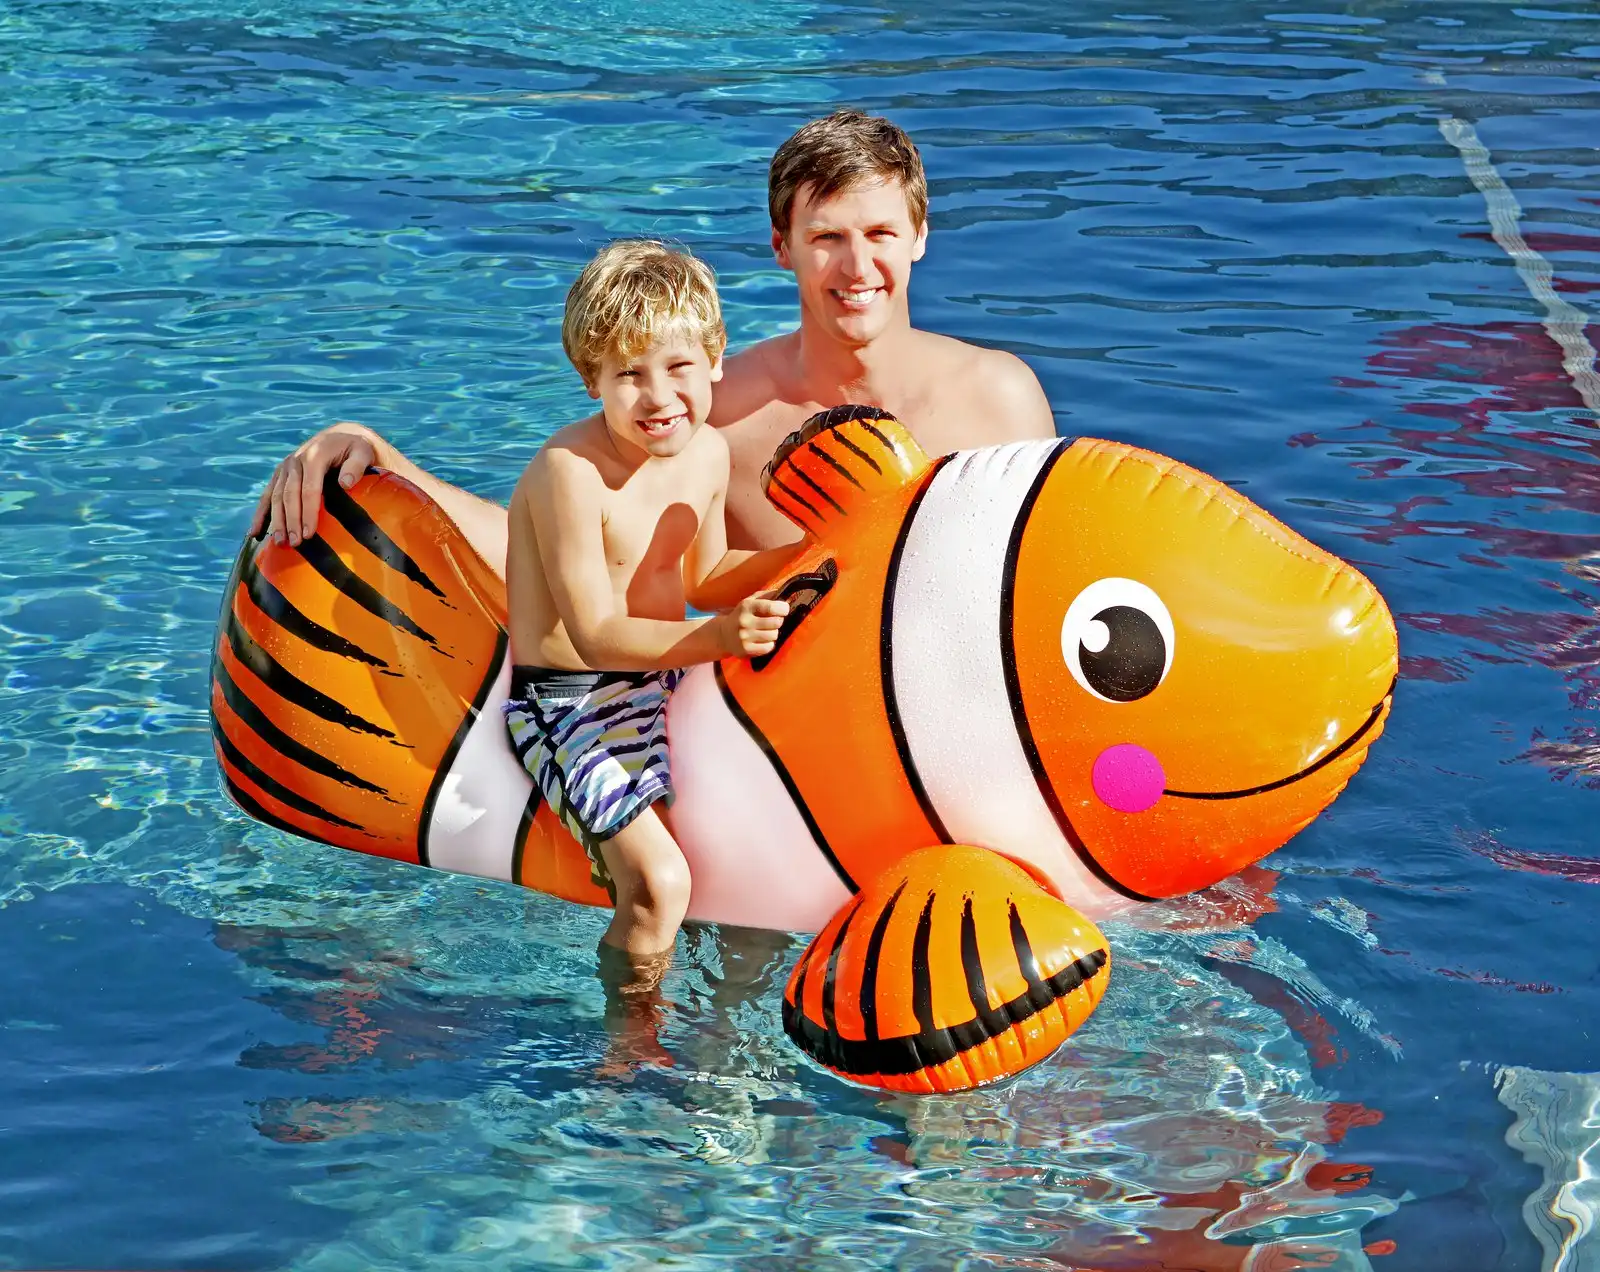 Airtime 147x87cm Inflatable Ride on Clown Fish Beach/Pool Floating Toy Orange